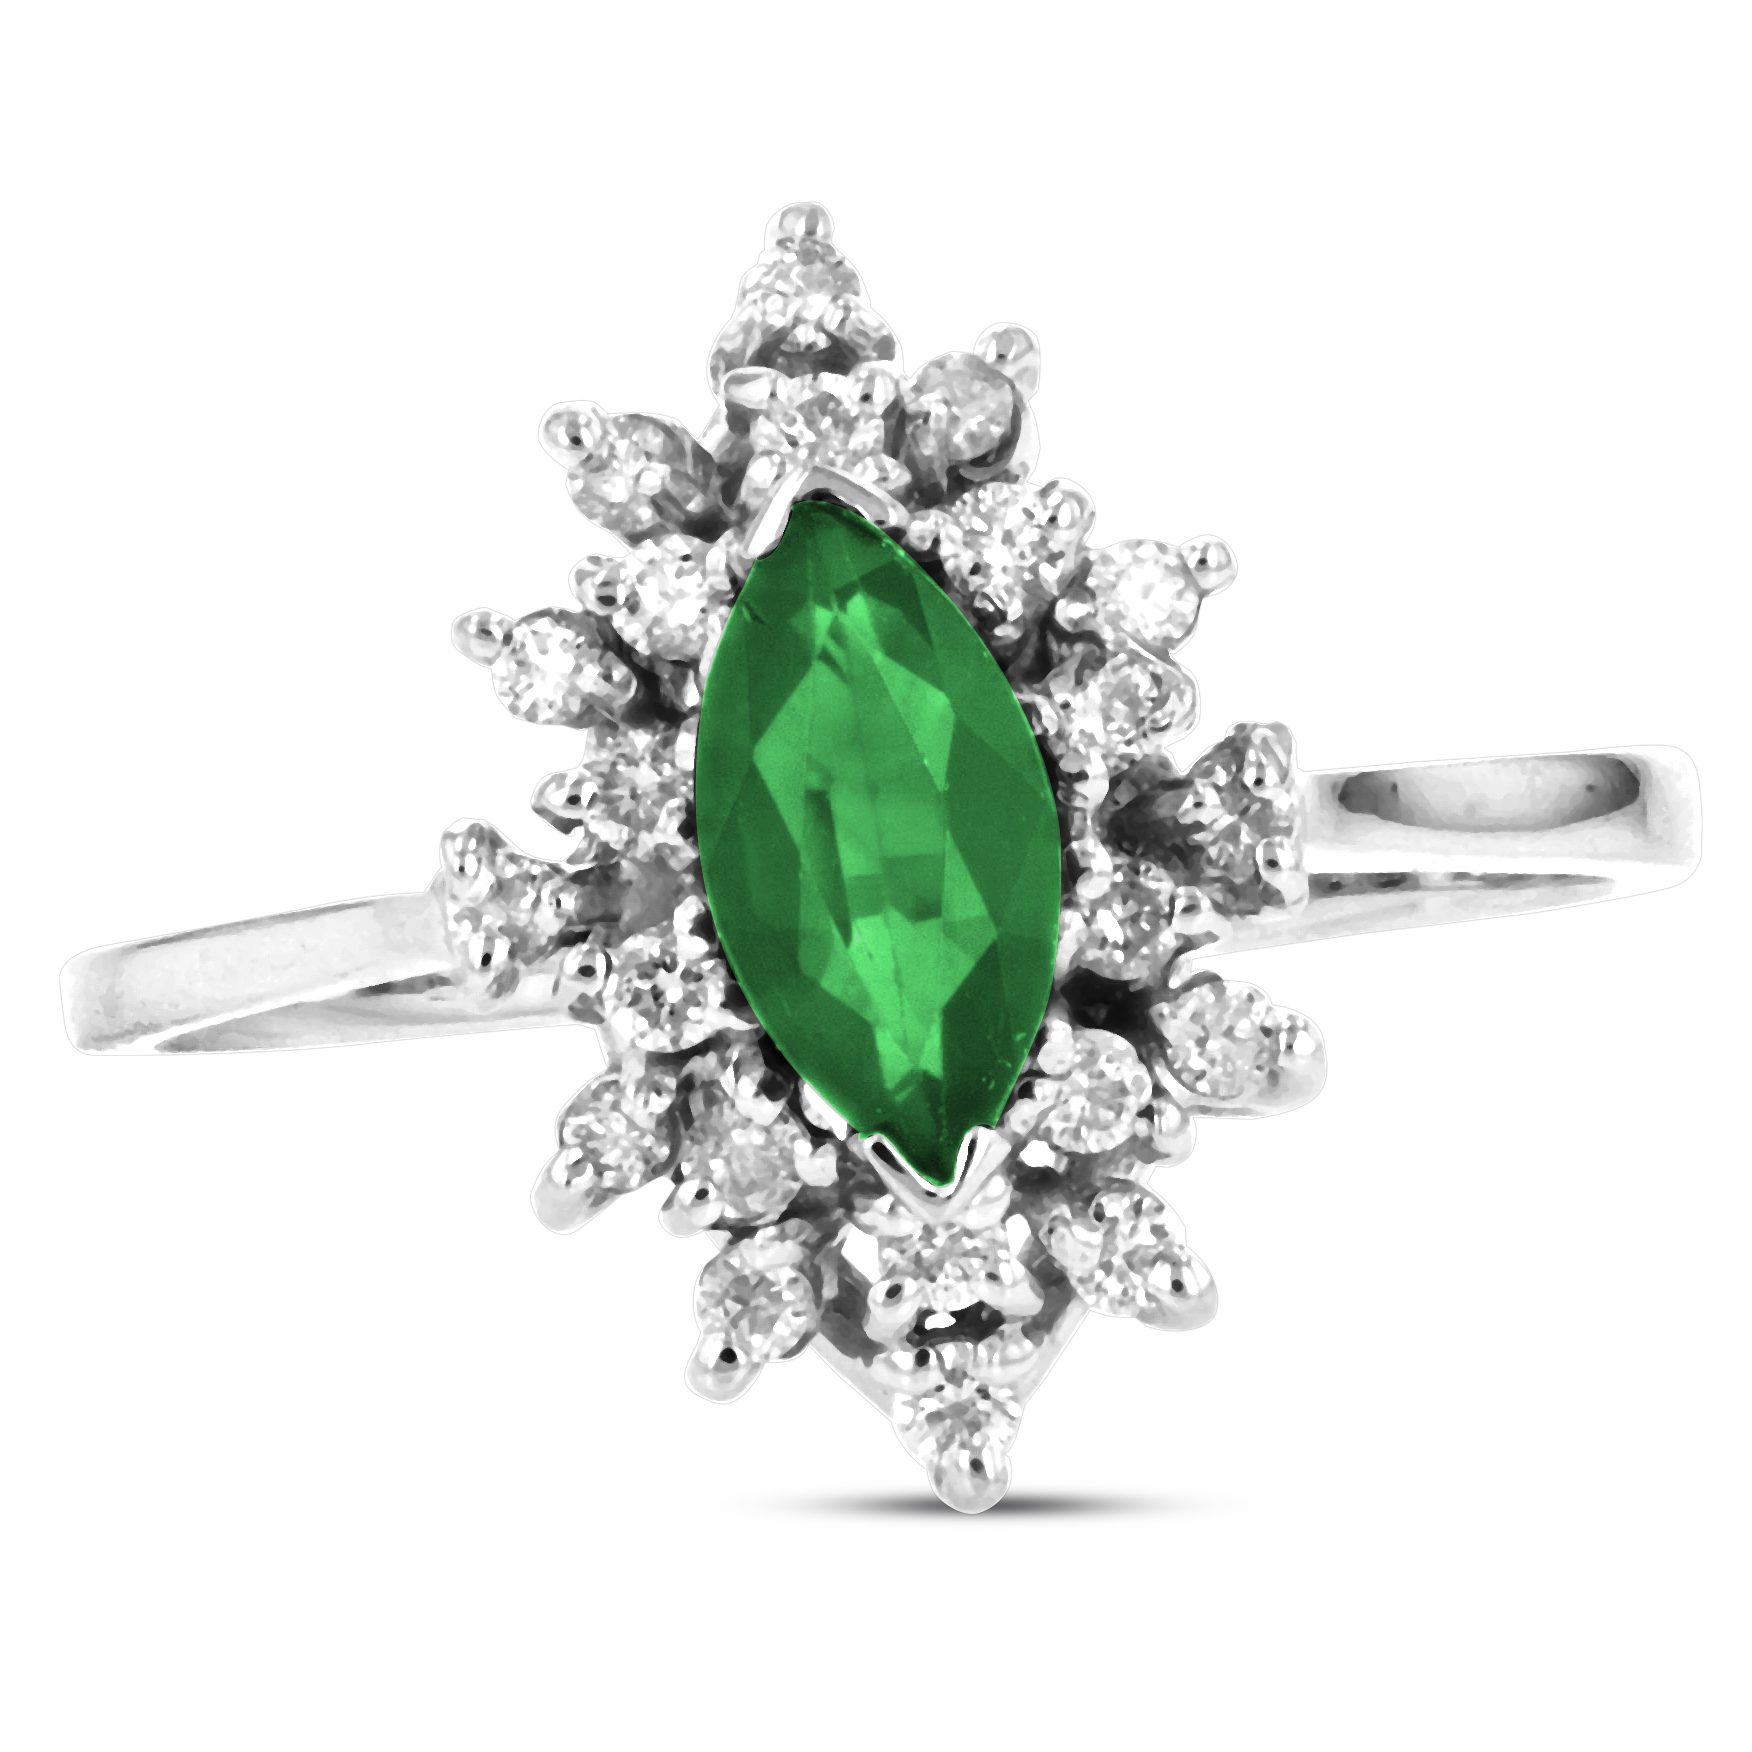 View 0.70ctw Diamond and Marquis Shaped Emerald in 14k White Gold